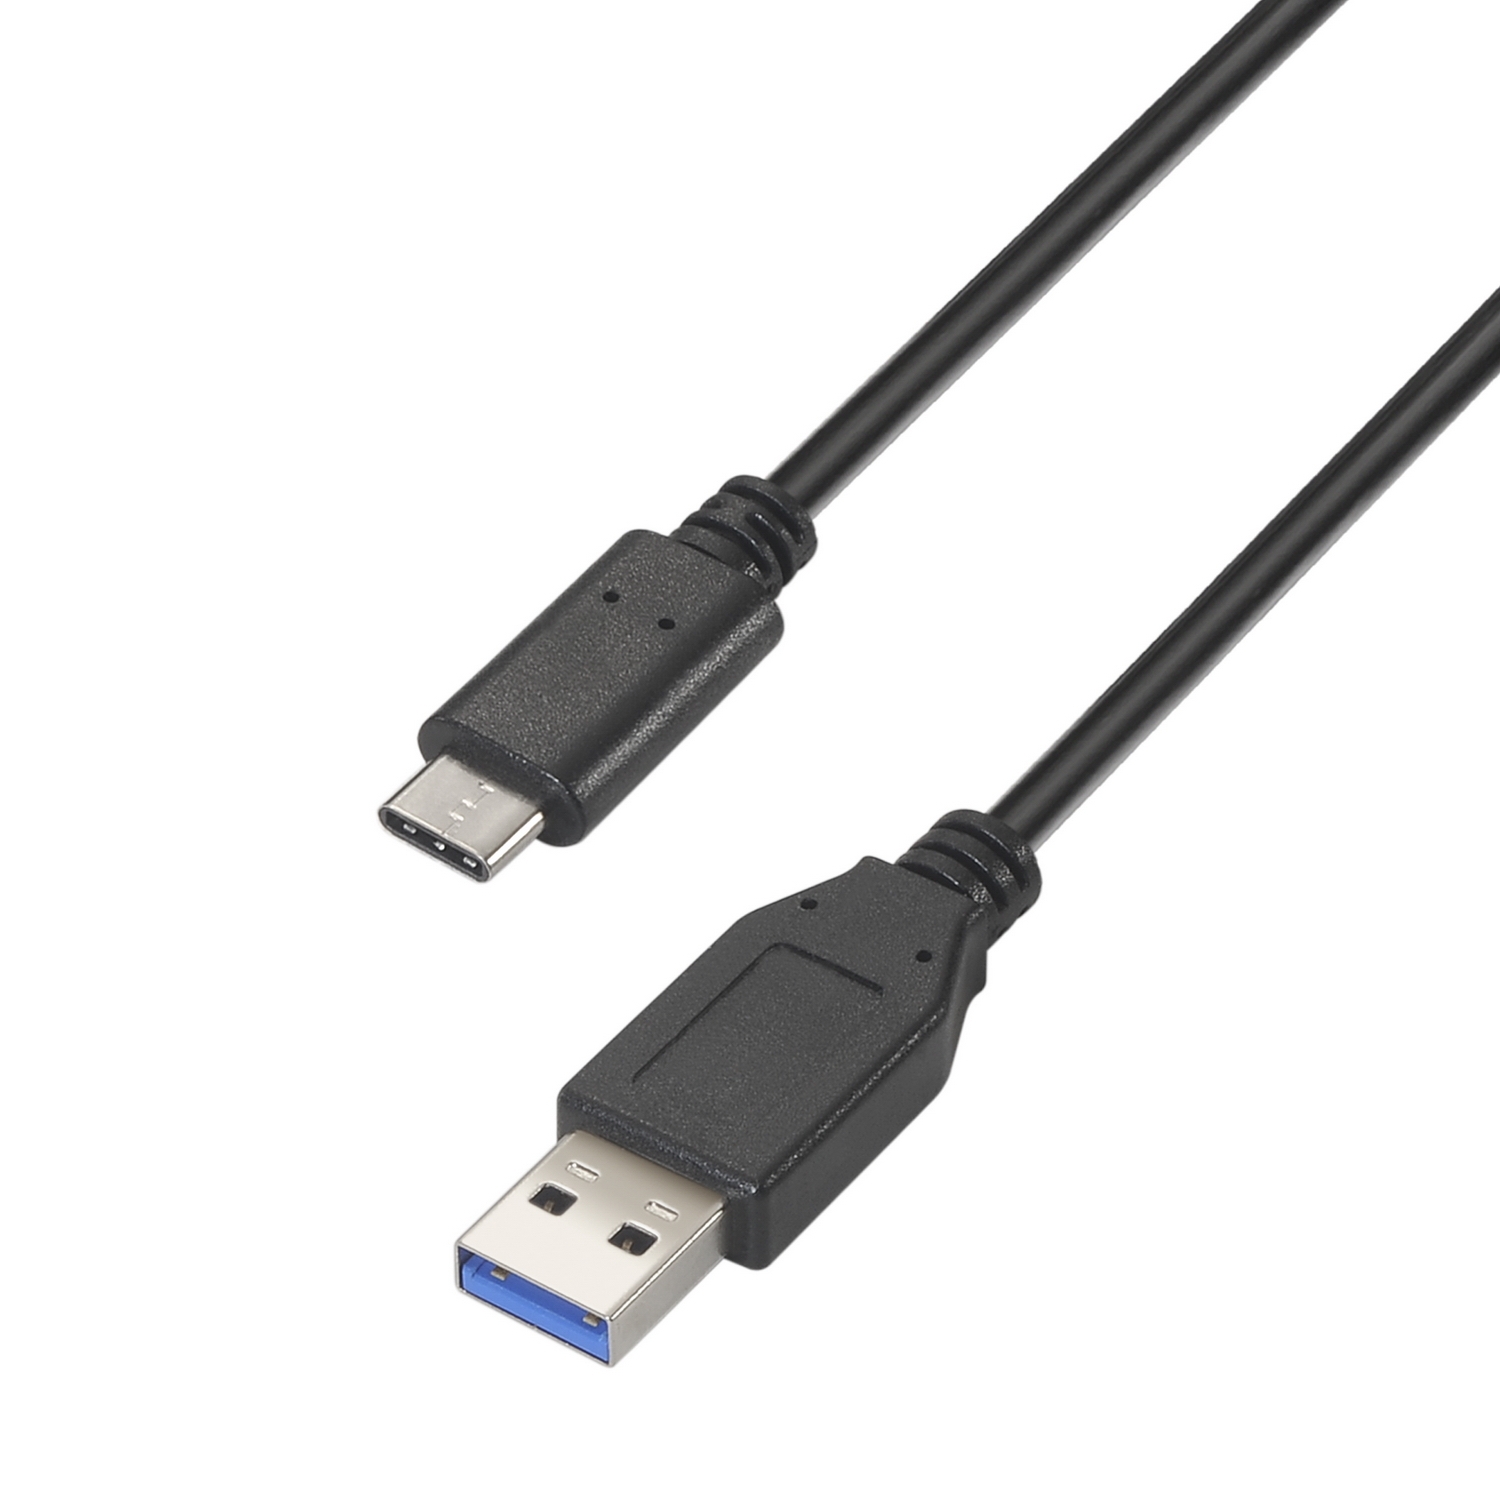 Cable 1m USB Tipo-C a USB Tipo-C 3.1 (10Gbps).